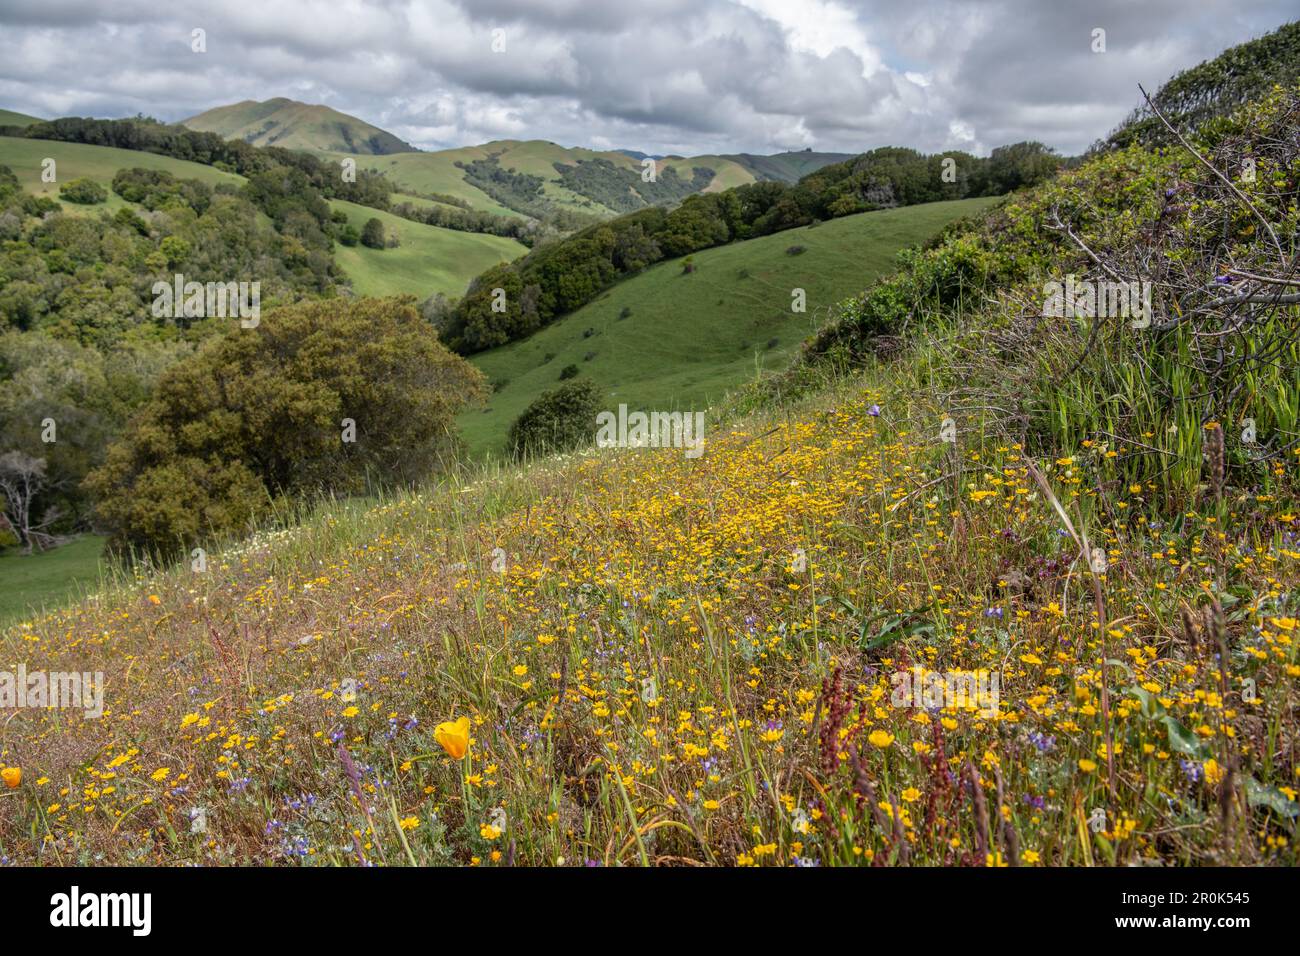 California goldfields (Lasthenia californica) & other wildflowers blooming during the spring super bloom in the CA hills. Stock Photo